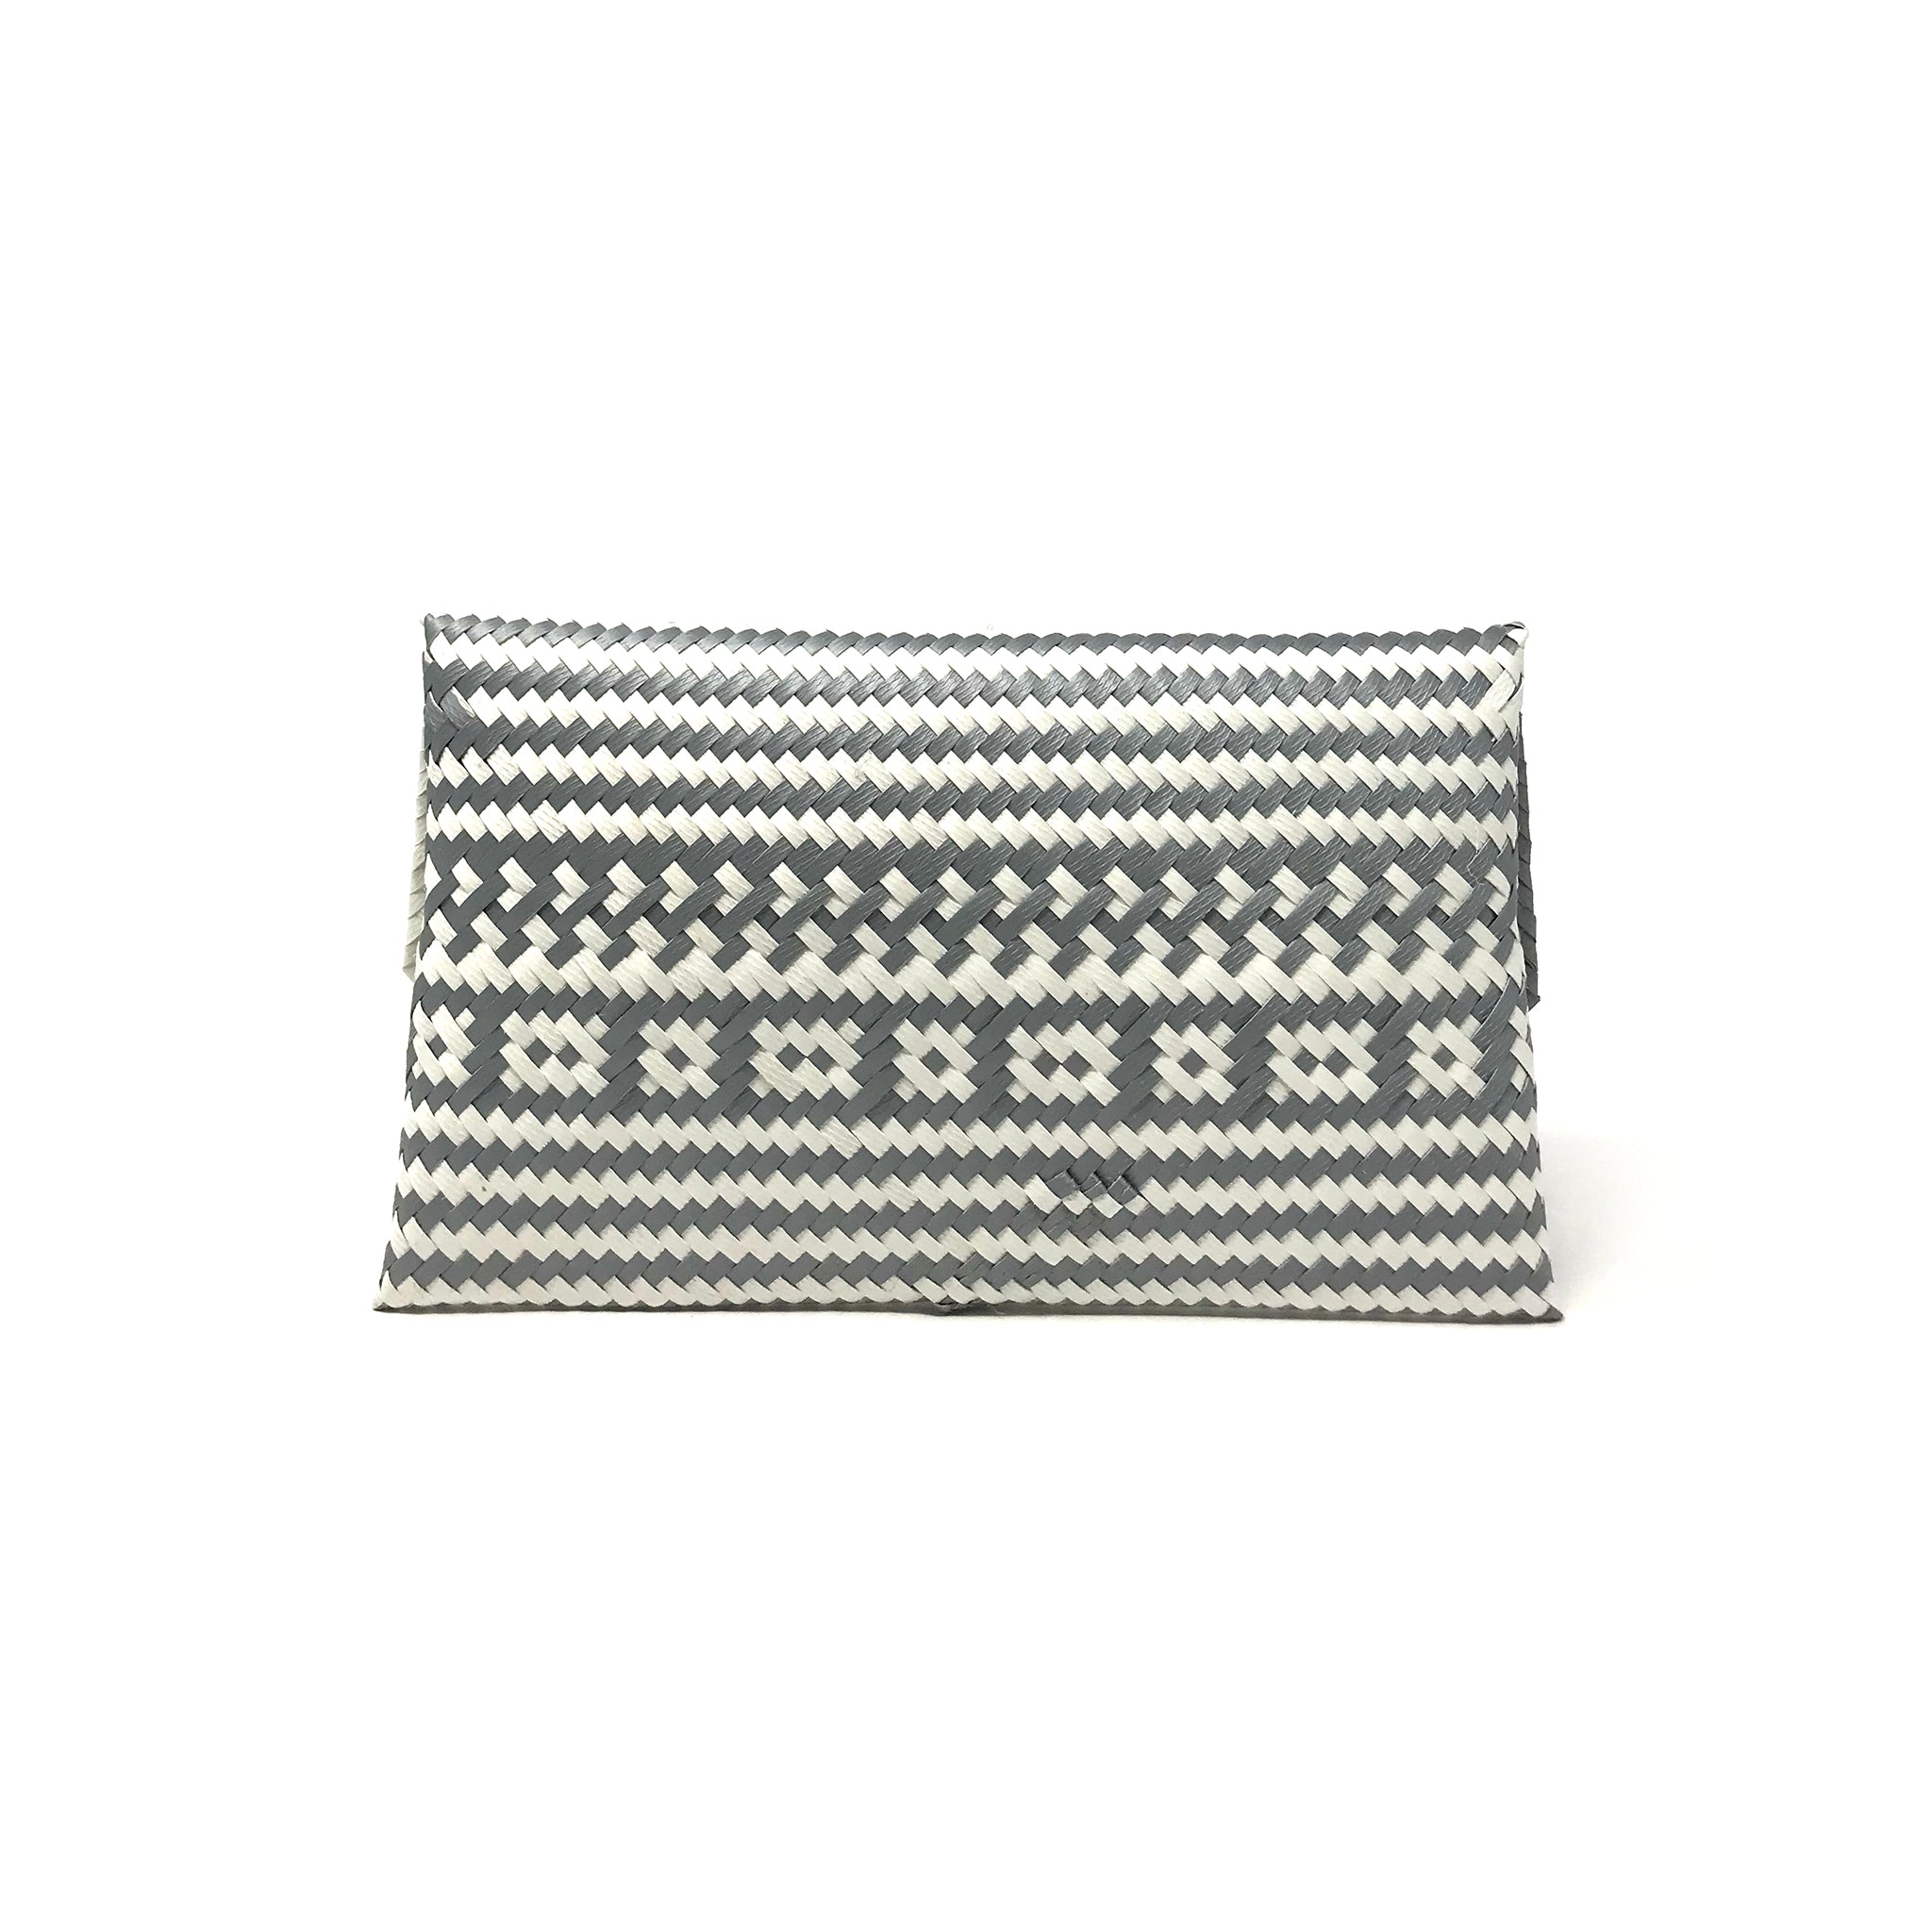 Grey and white clutch facing backwards.